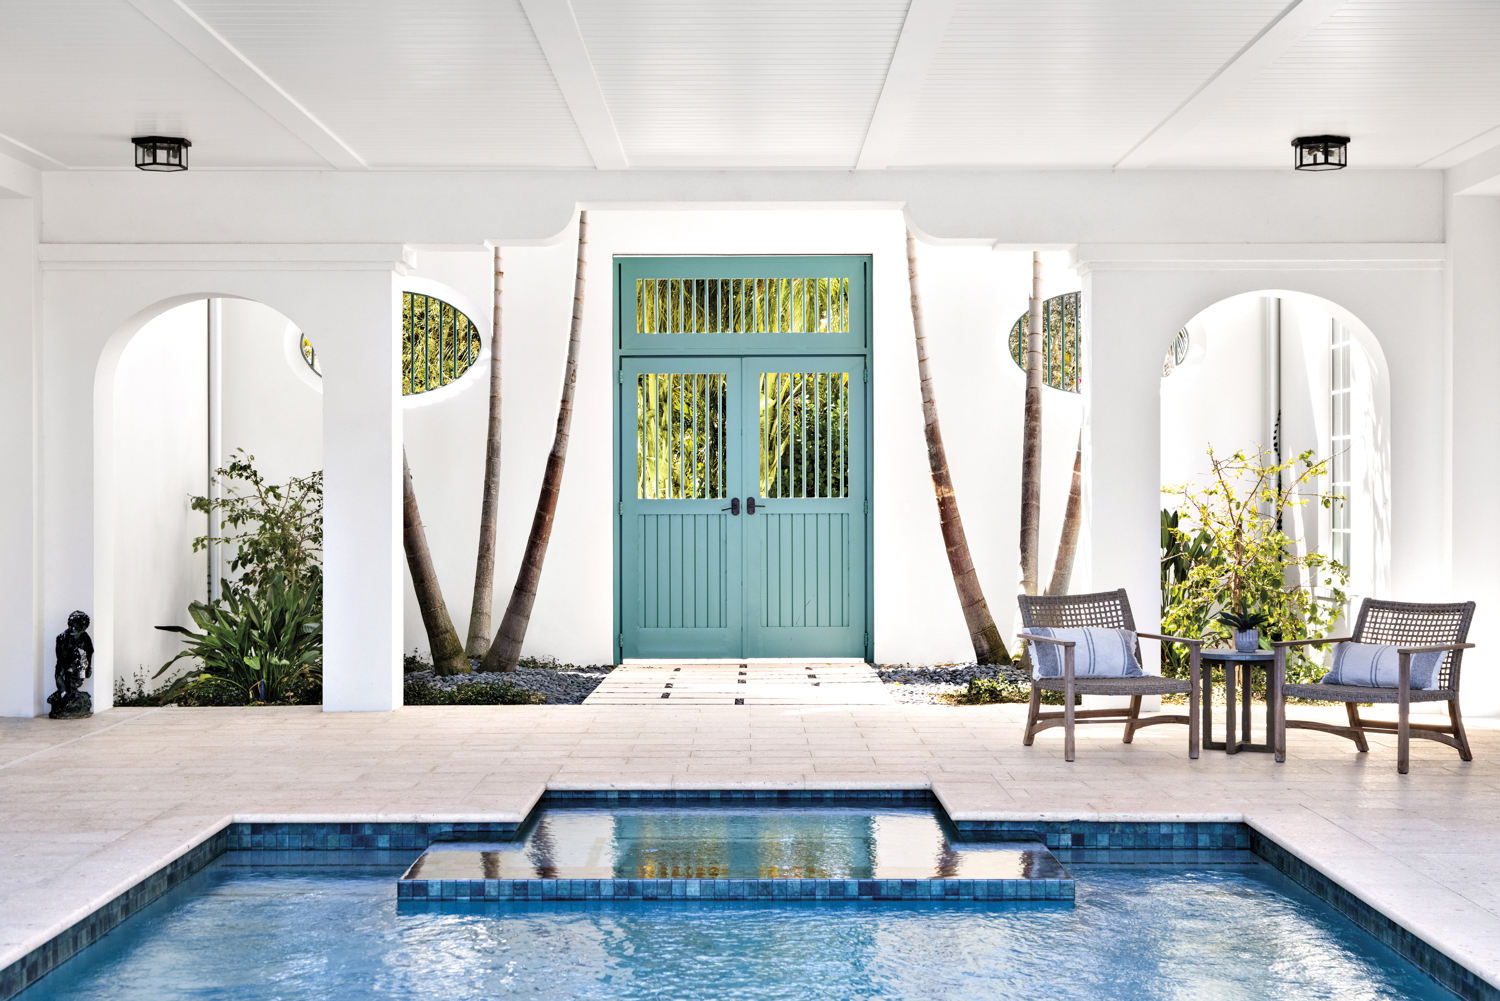 logga with white walls and ceiling, coastal green-colored door, pool and sitting area